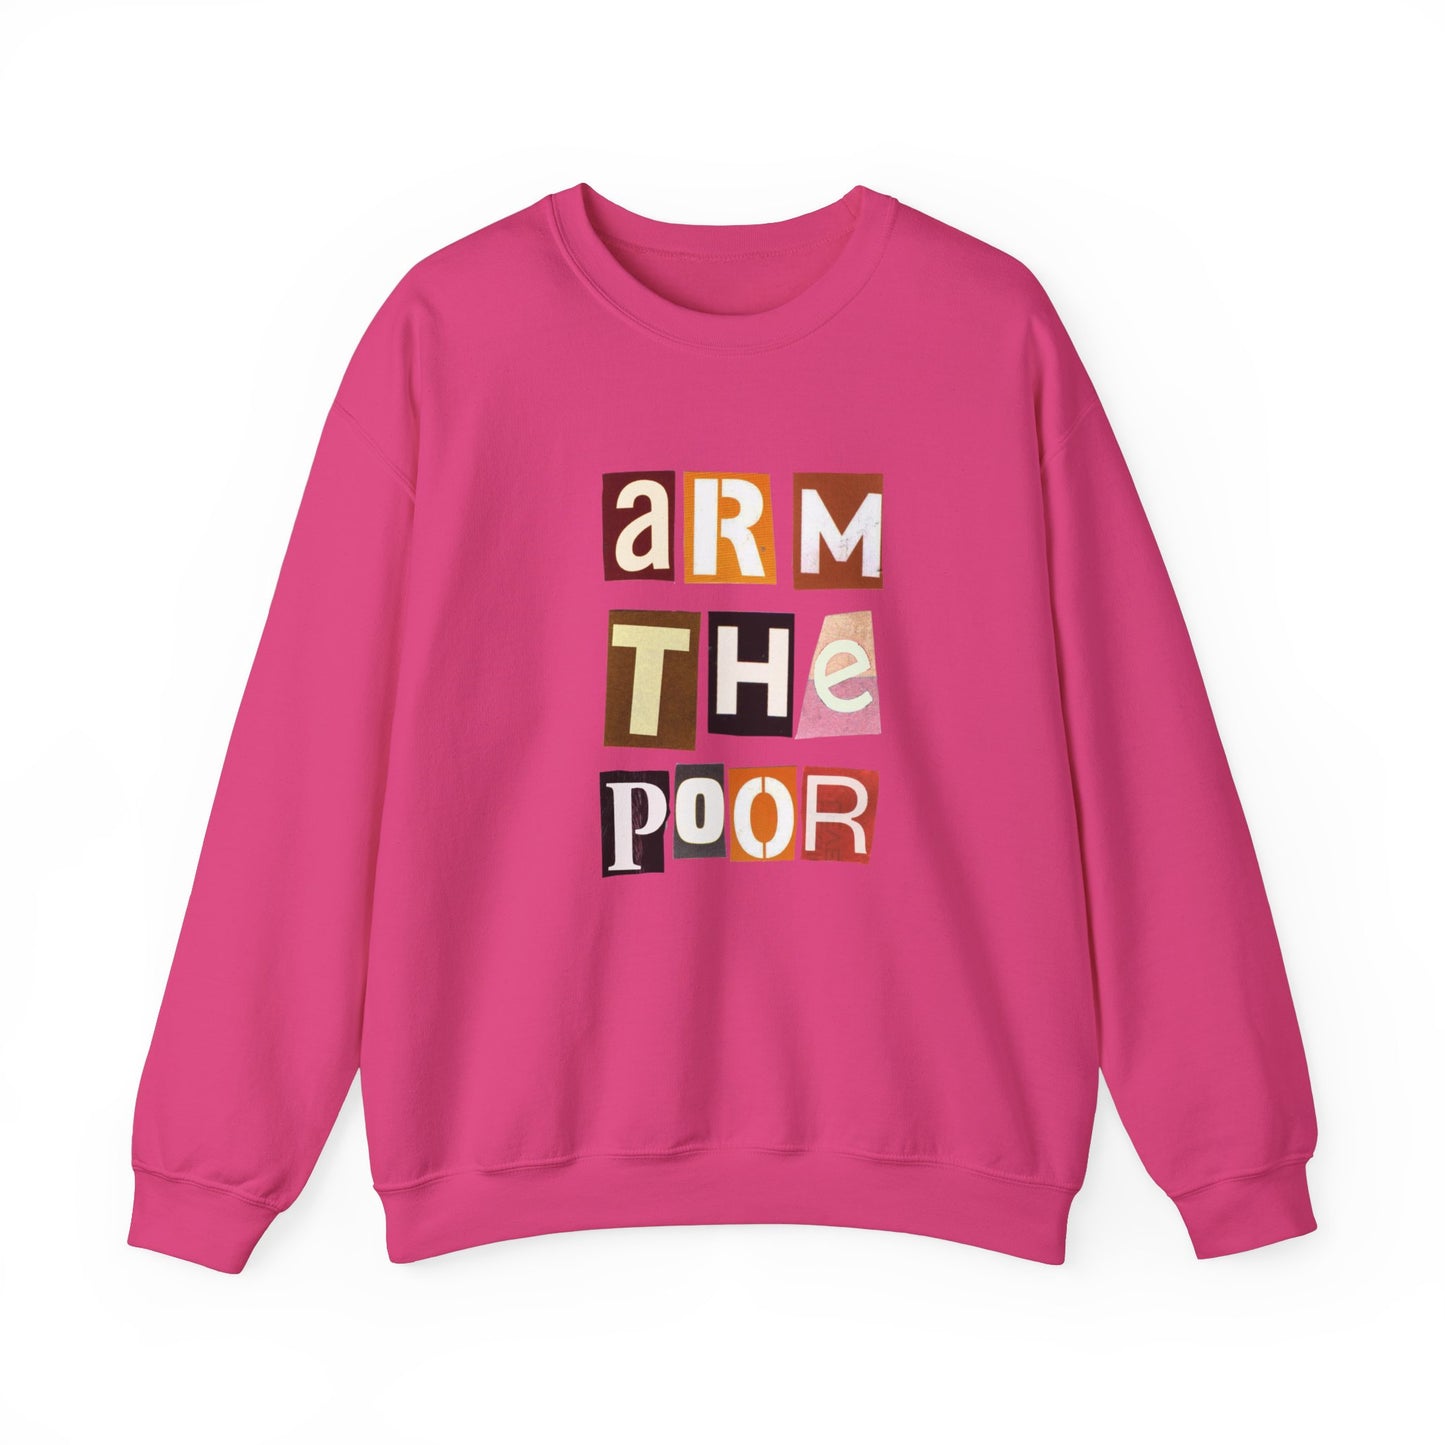 "Arm the poor" by Tin Foil Wear